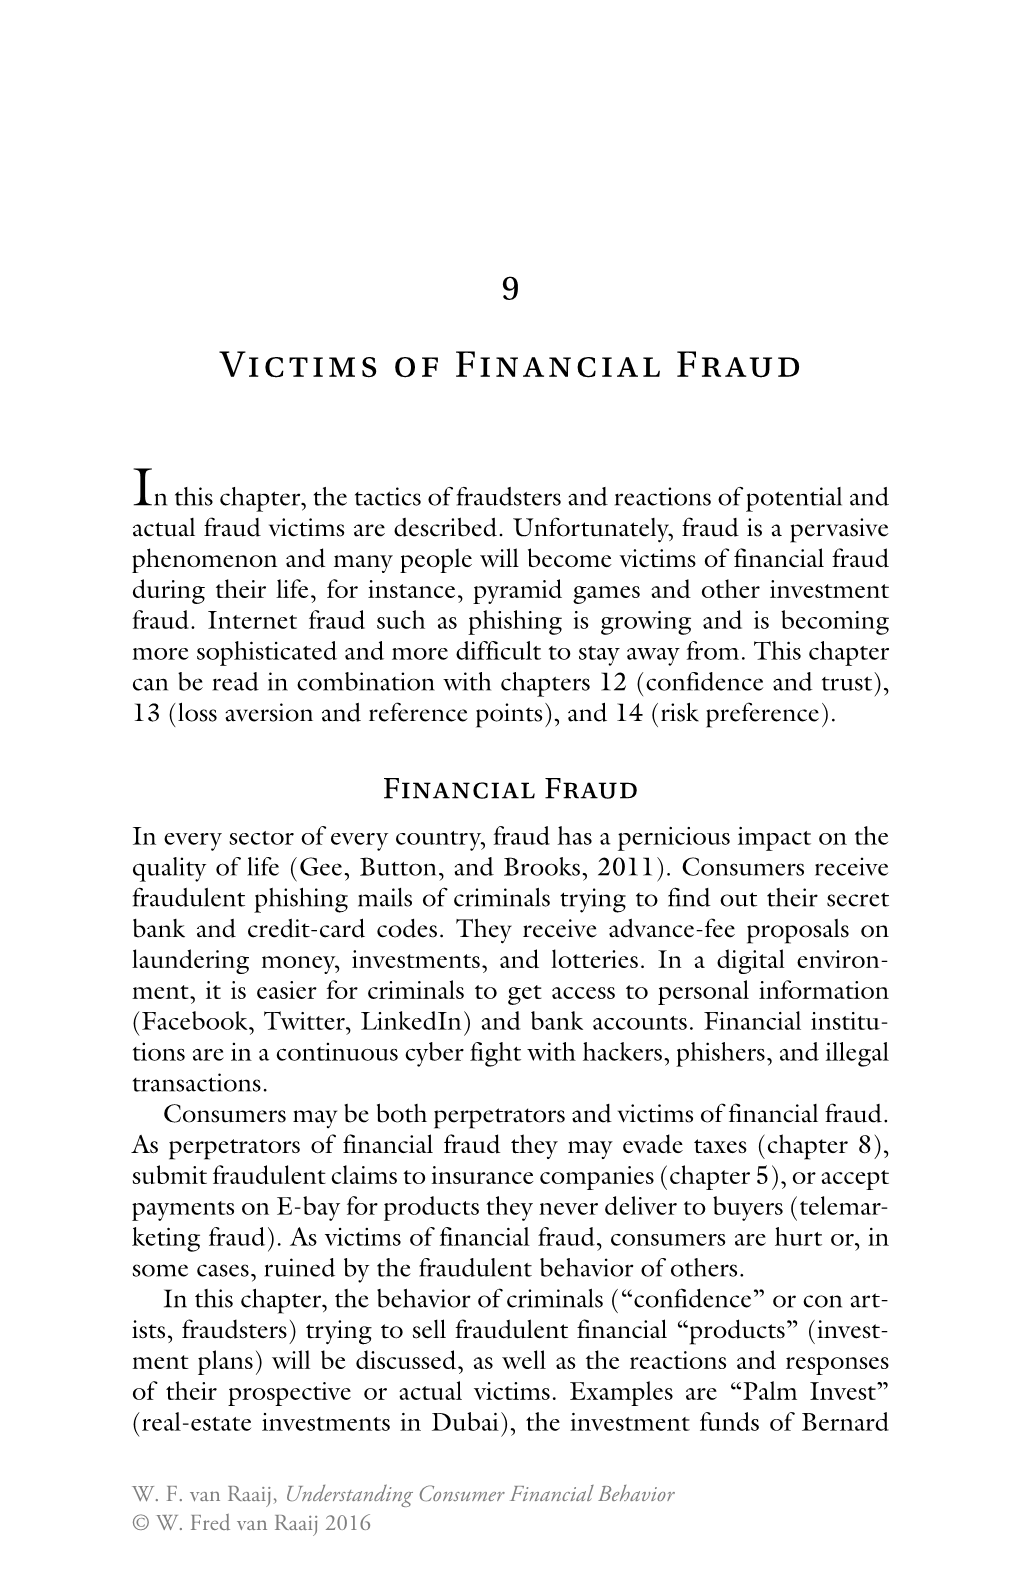 Victims of Financial Fraud